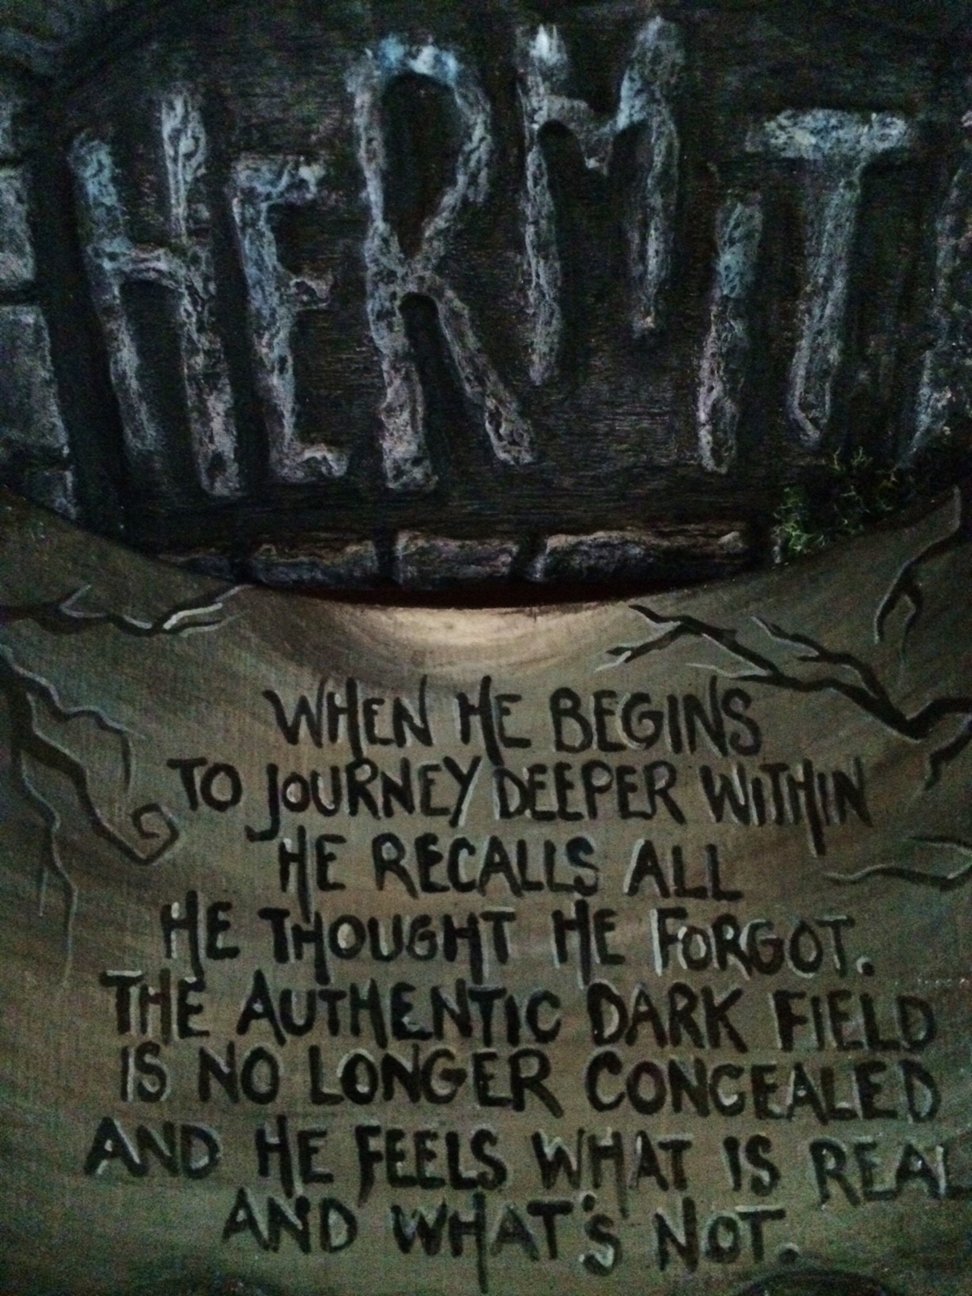 hand-painted lettered wooden sign with verse about the Hermit